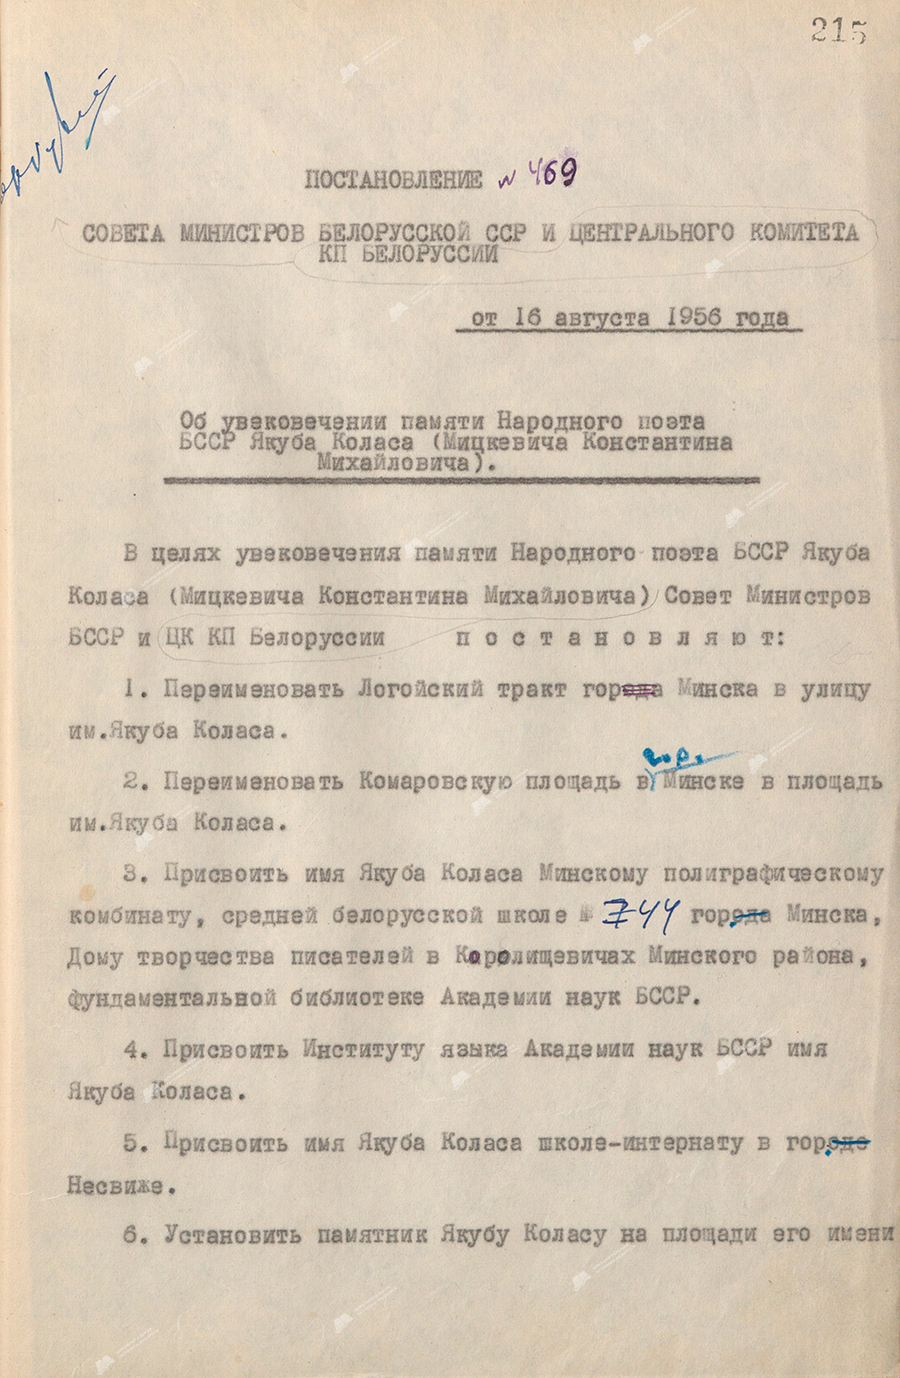 Resolution No. 469 of the Council of Ministers of the BSSR and the Central Committee of the Communist Party of Belarus «On perpetuating the memory of the People’s Poet of the BSSR Yakub Kolas (Mitskevich Konstantin Mikhailovich)»-с. 0